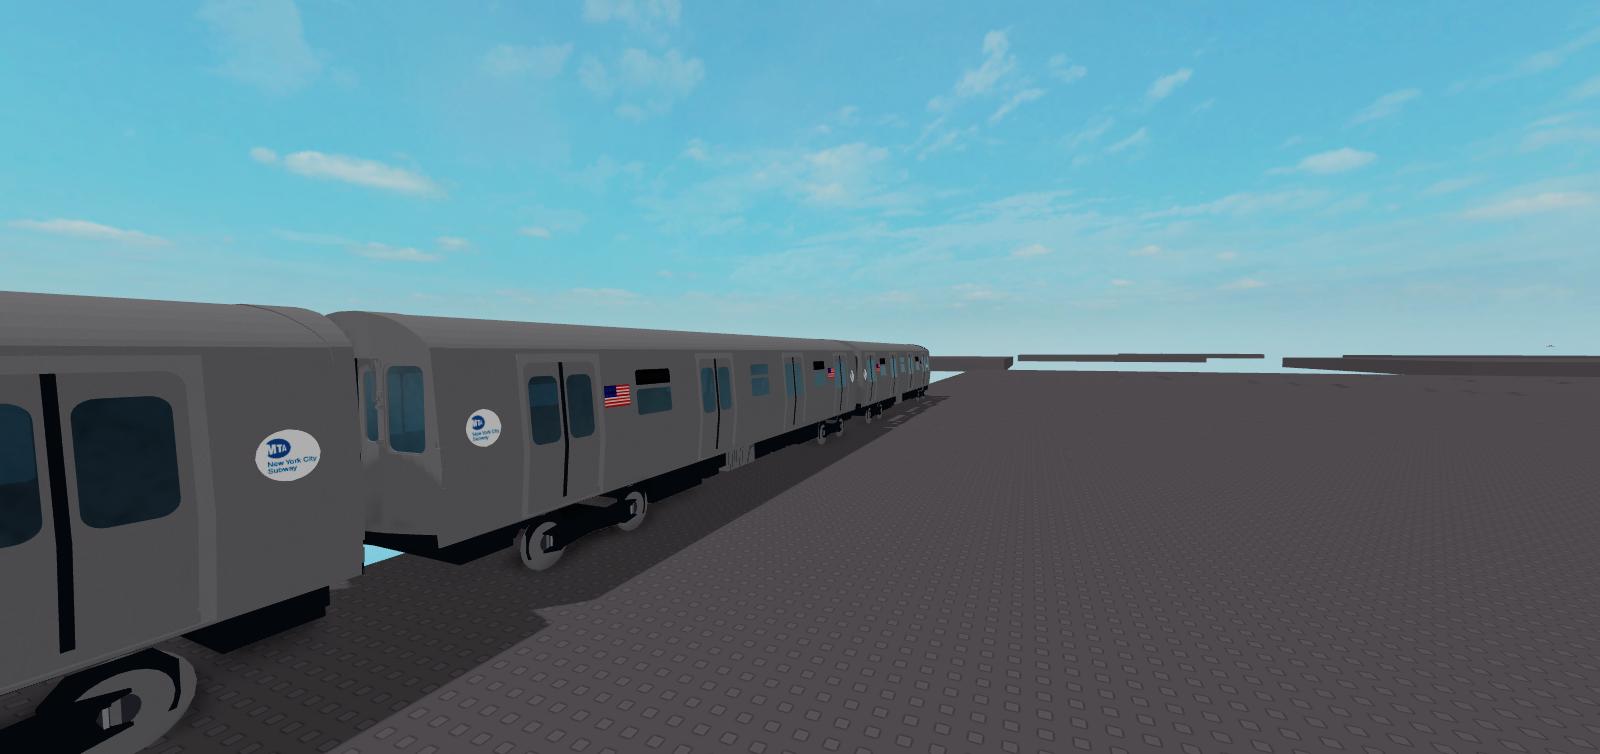 Meme Review On Twitter Robloxdev Roblox The Mta R160 Has Been Completed It Doesn T Have An Interior Or Top Details But Everything Else Is Detailed Or Somewhat Accurate But It S Done Https T Co Vd9fqjcx49 - roblox r160